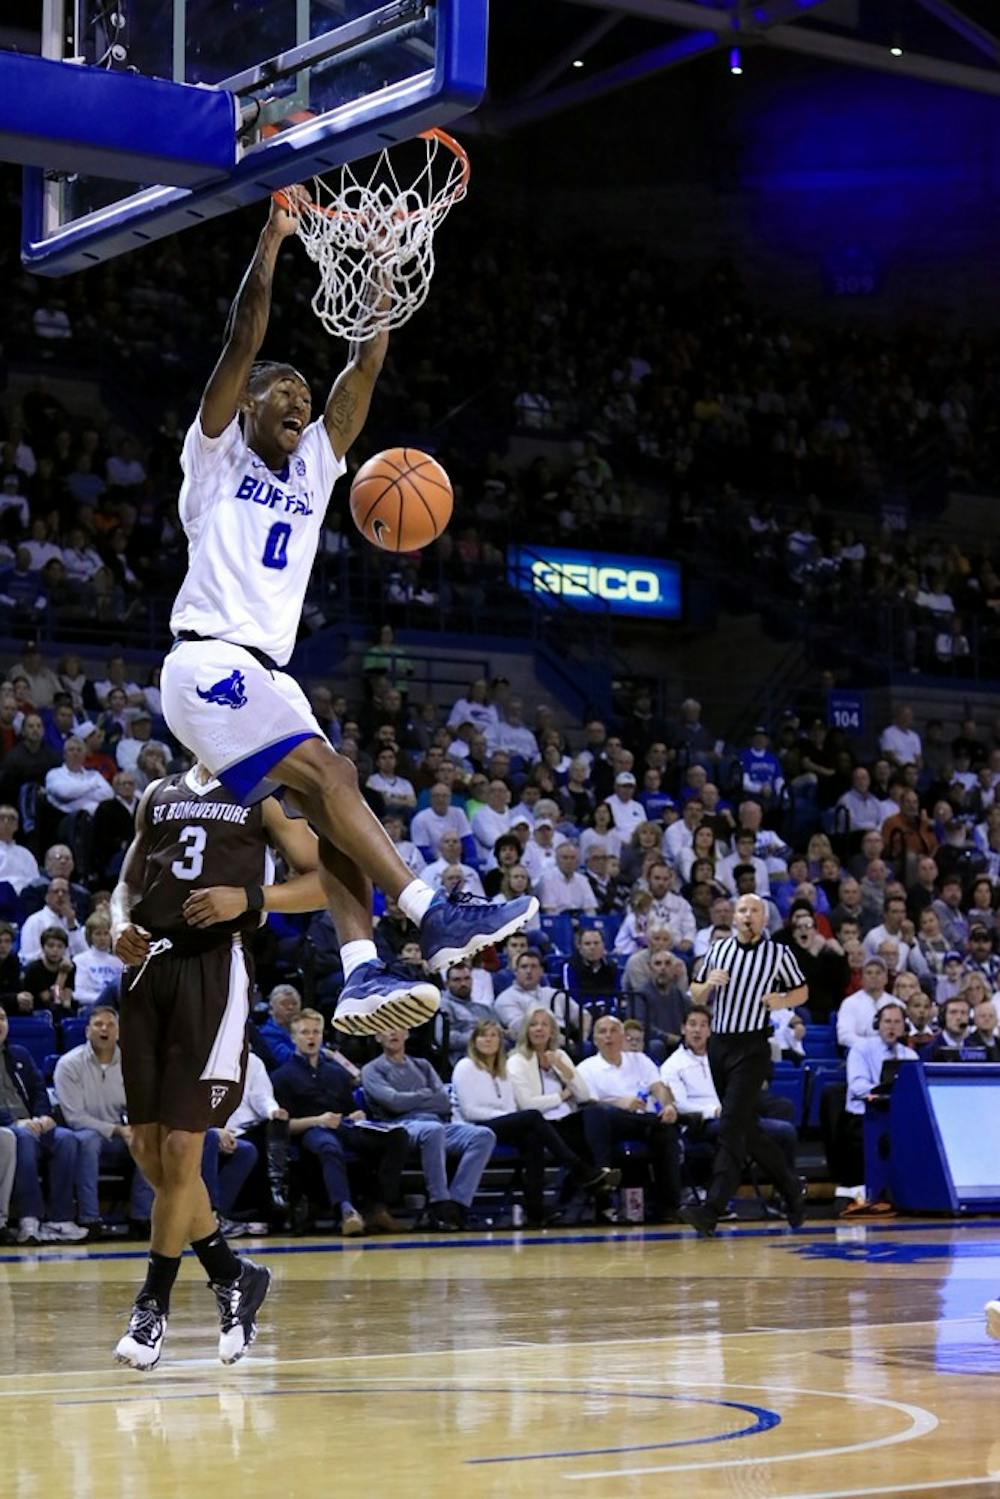 <p>Freshman guard James Reese slams it at the rim. The Bulls are coming off a close overtime loss.</p>